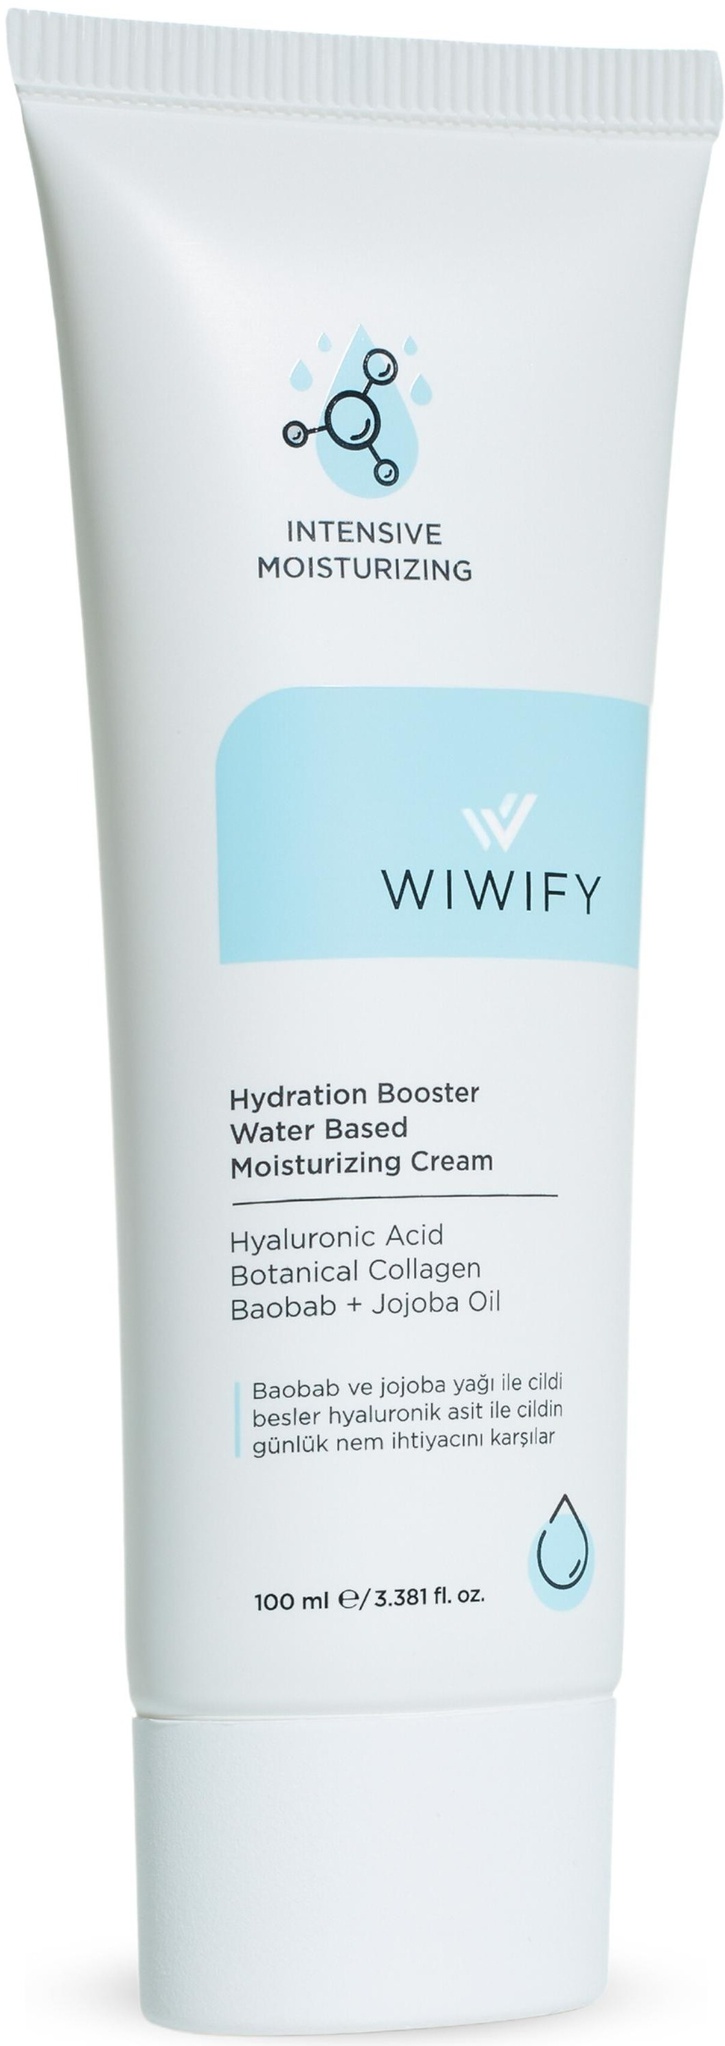 WIWIFY Hydration Booster Water Based Moisturising Cream